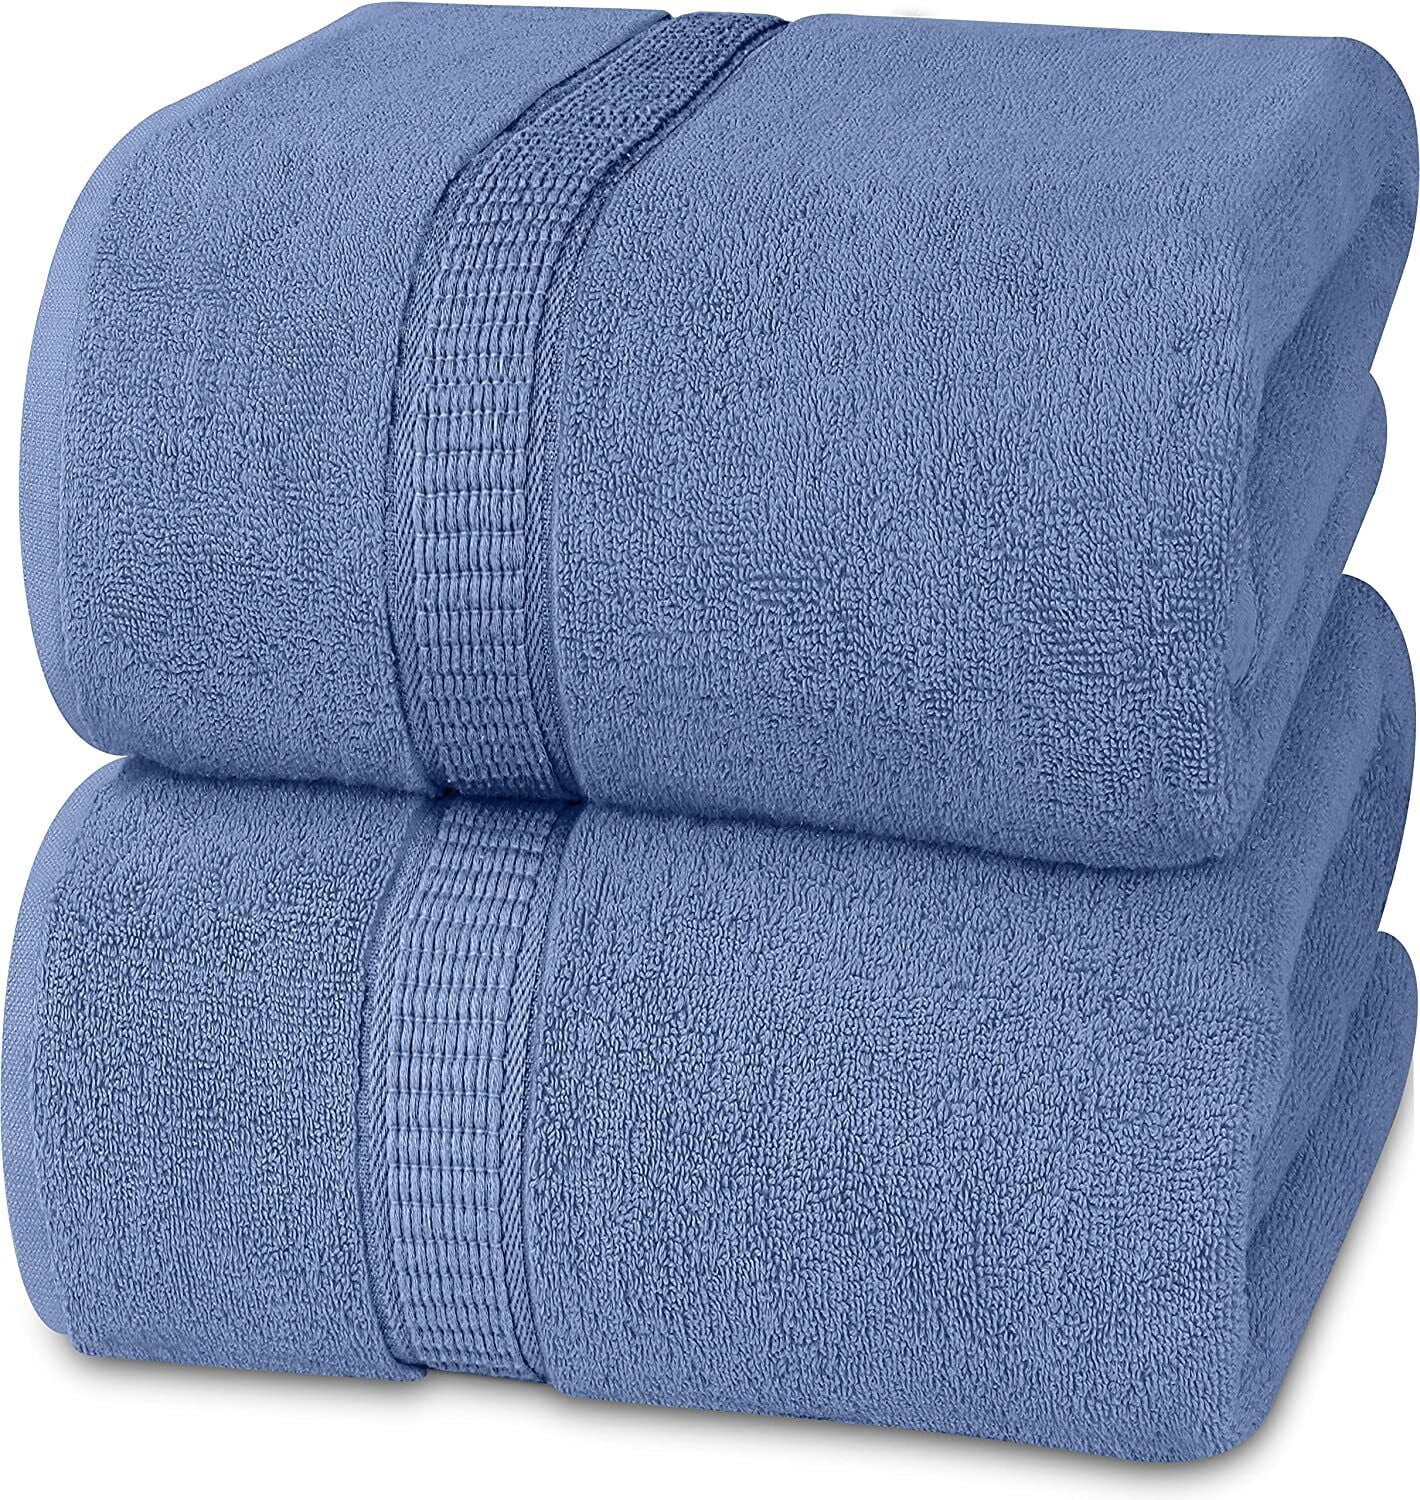 Junsey 4 Pcs Oversized Bath Towels Extra Large 35x70 Inches Bath Sheet 600  GSM Quick Dry Towel for Bathroom Ultra Soft Hotel Absorbent Towels Set Blue